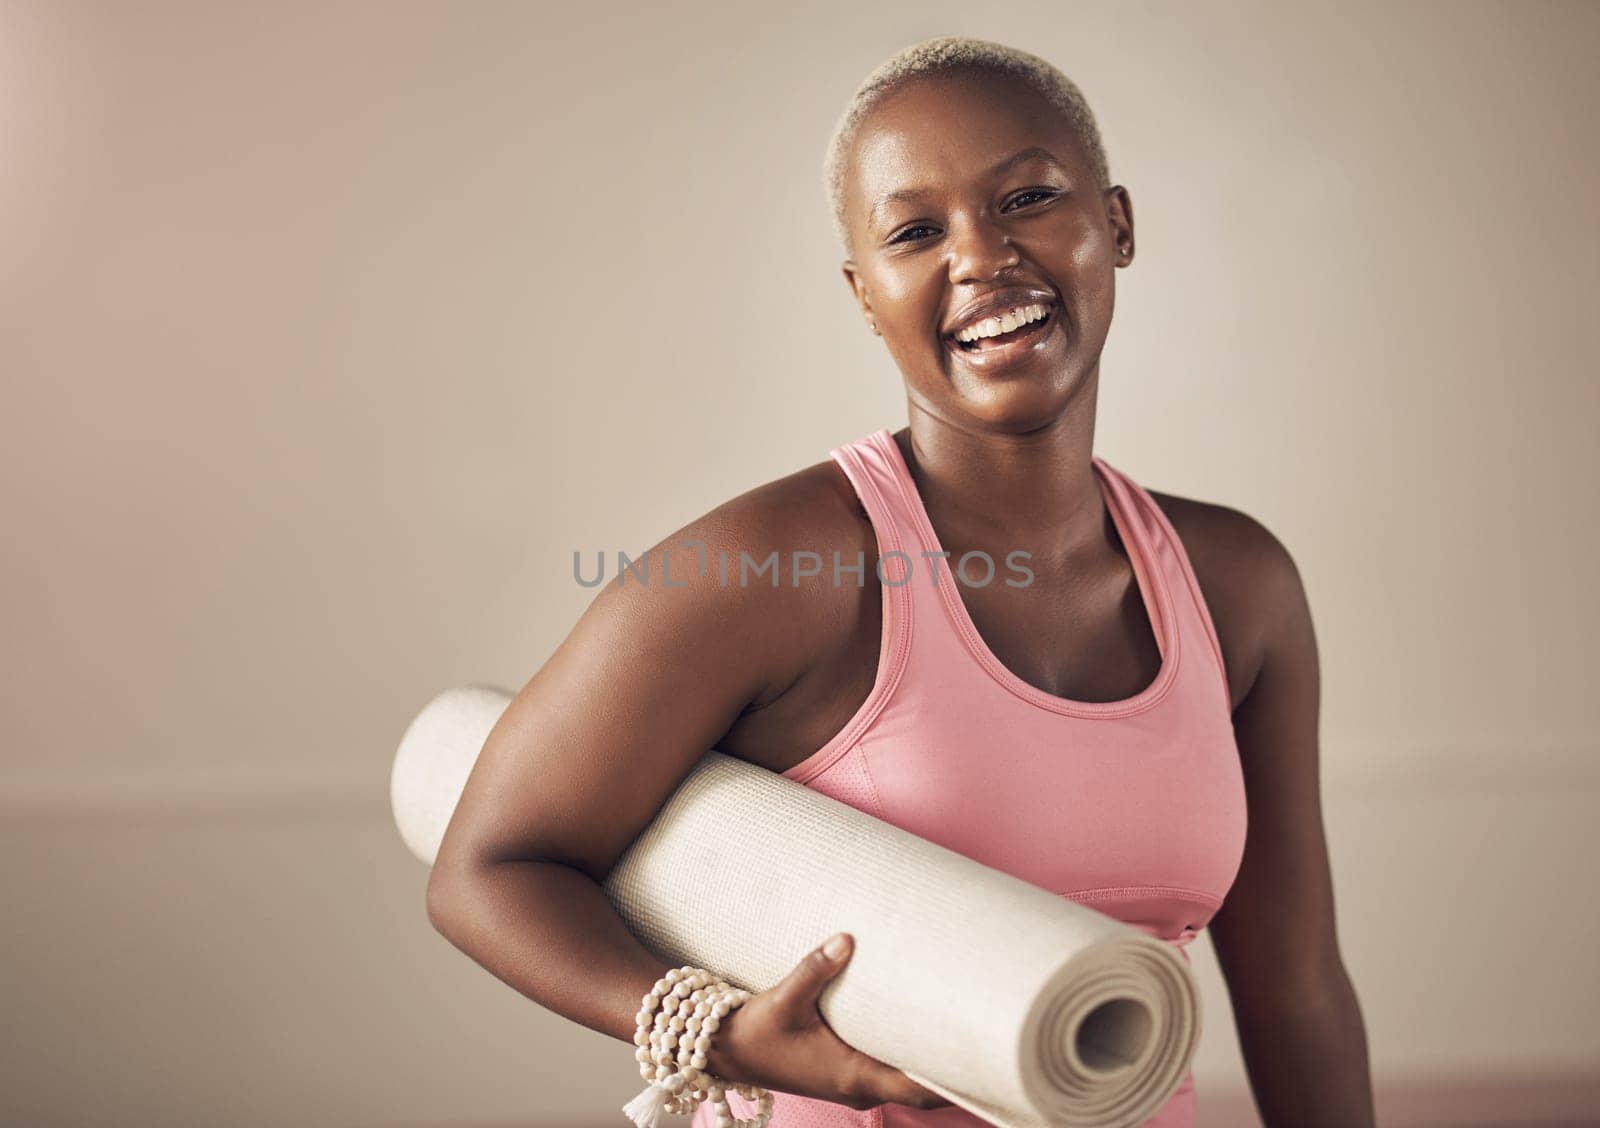 Smiling my way out the yoga studio. Cropped portrait of an attractive young woman standing alone and holding her yoga mat before an indoor yoga session